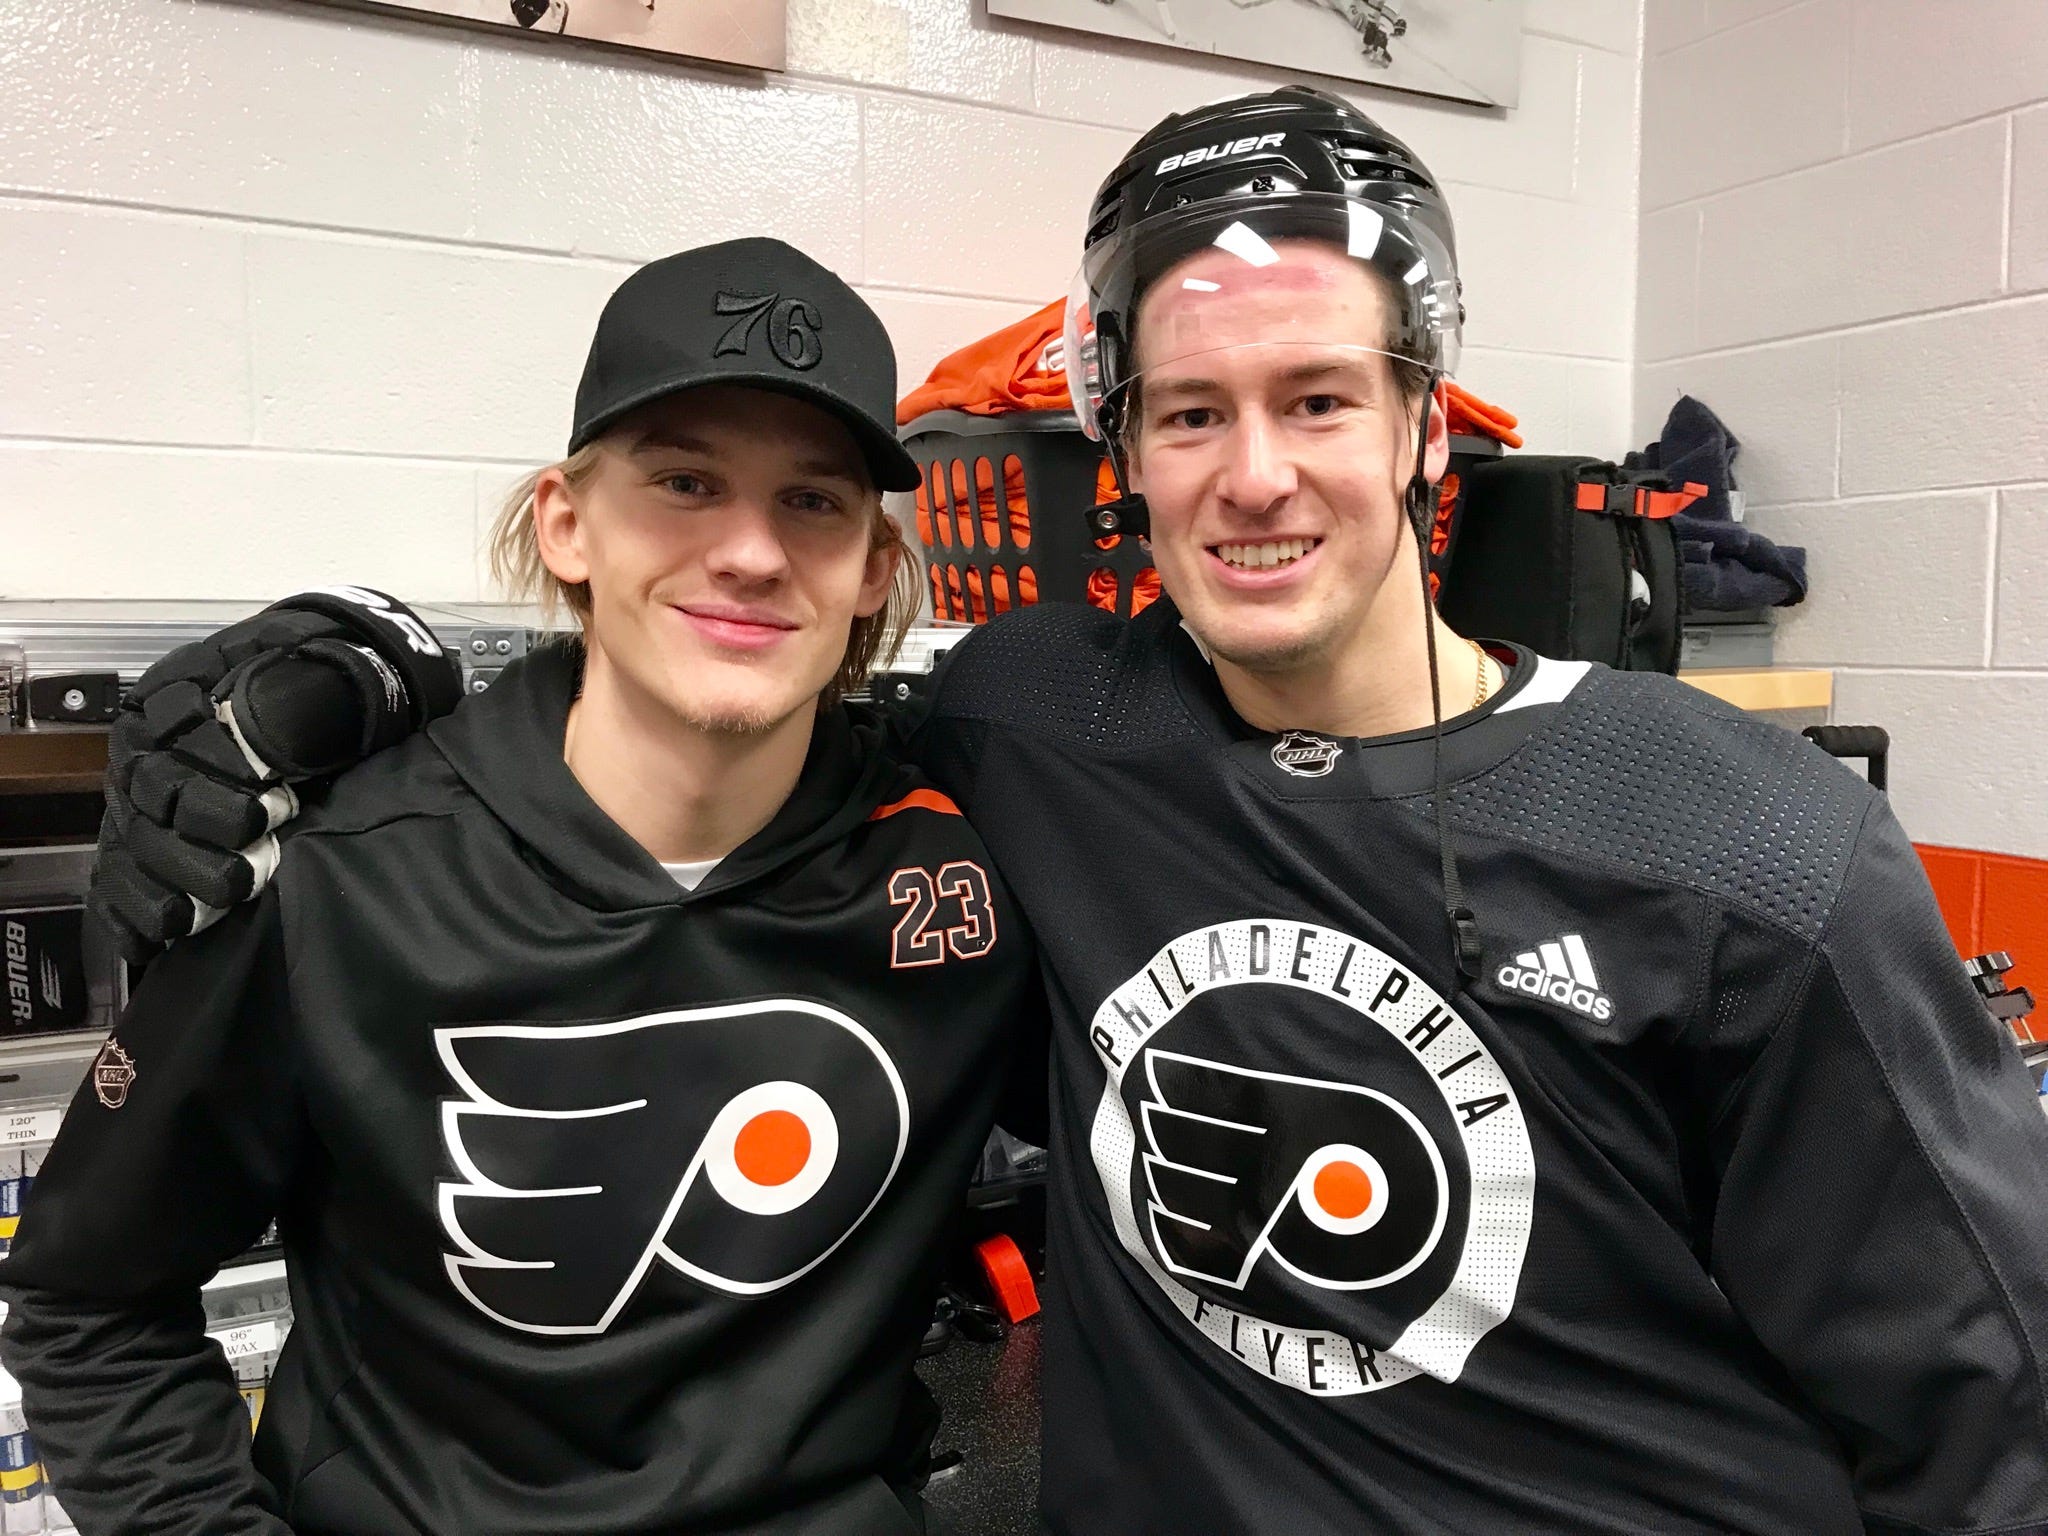 flyers cancer jersey